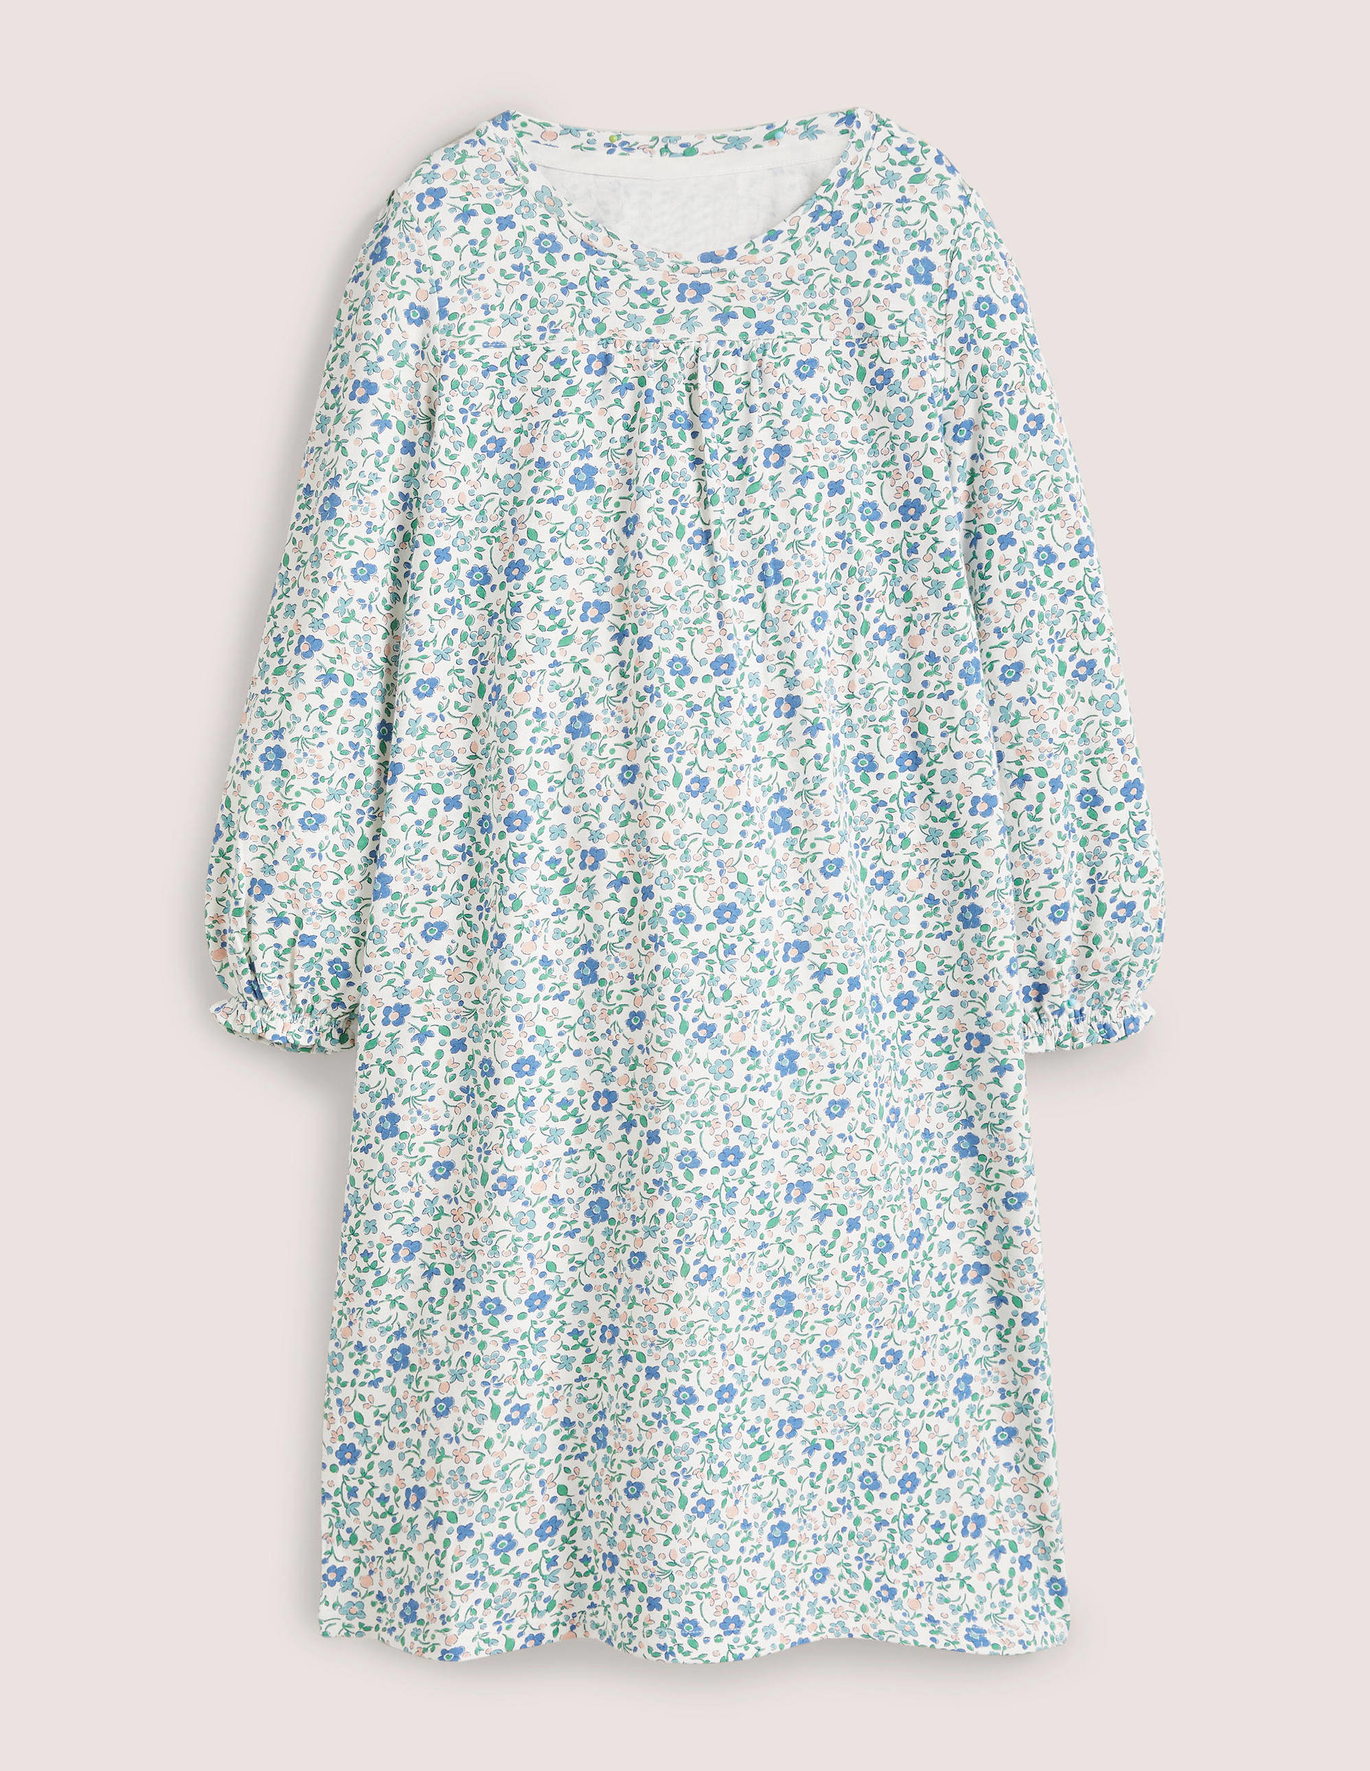 Boden Printed Long-sleeved Nightie - Ivory/Blue Ditsy Floral